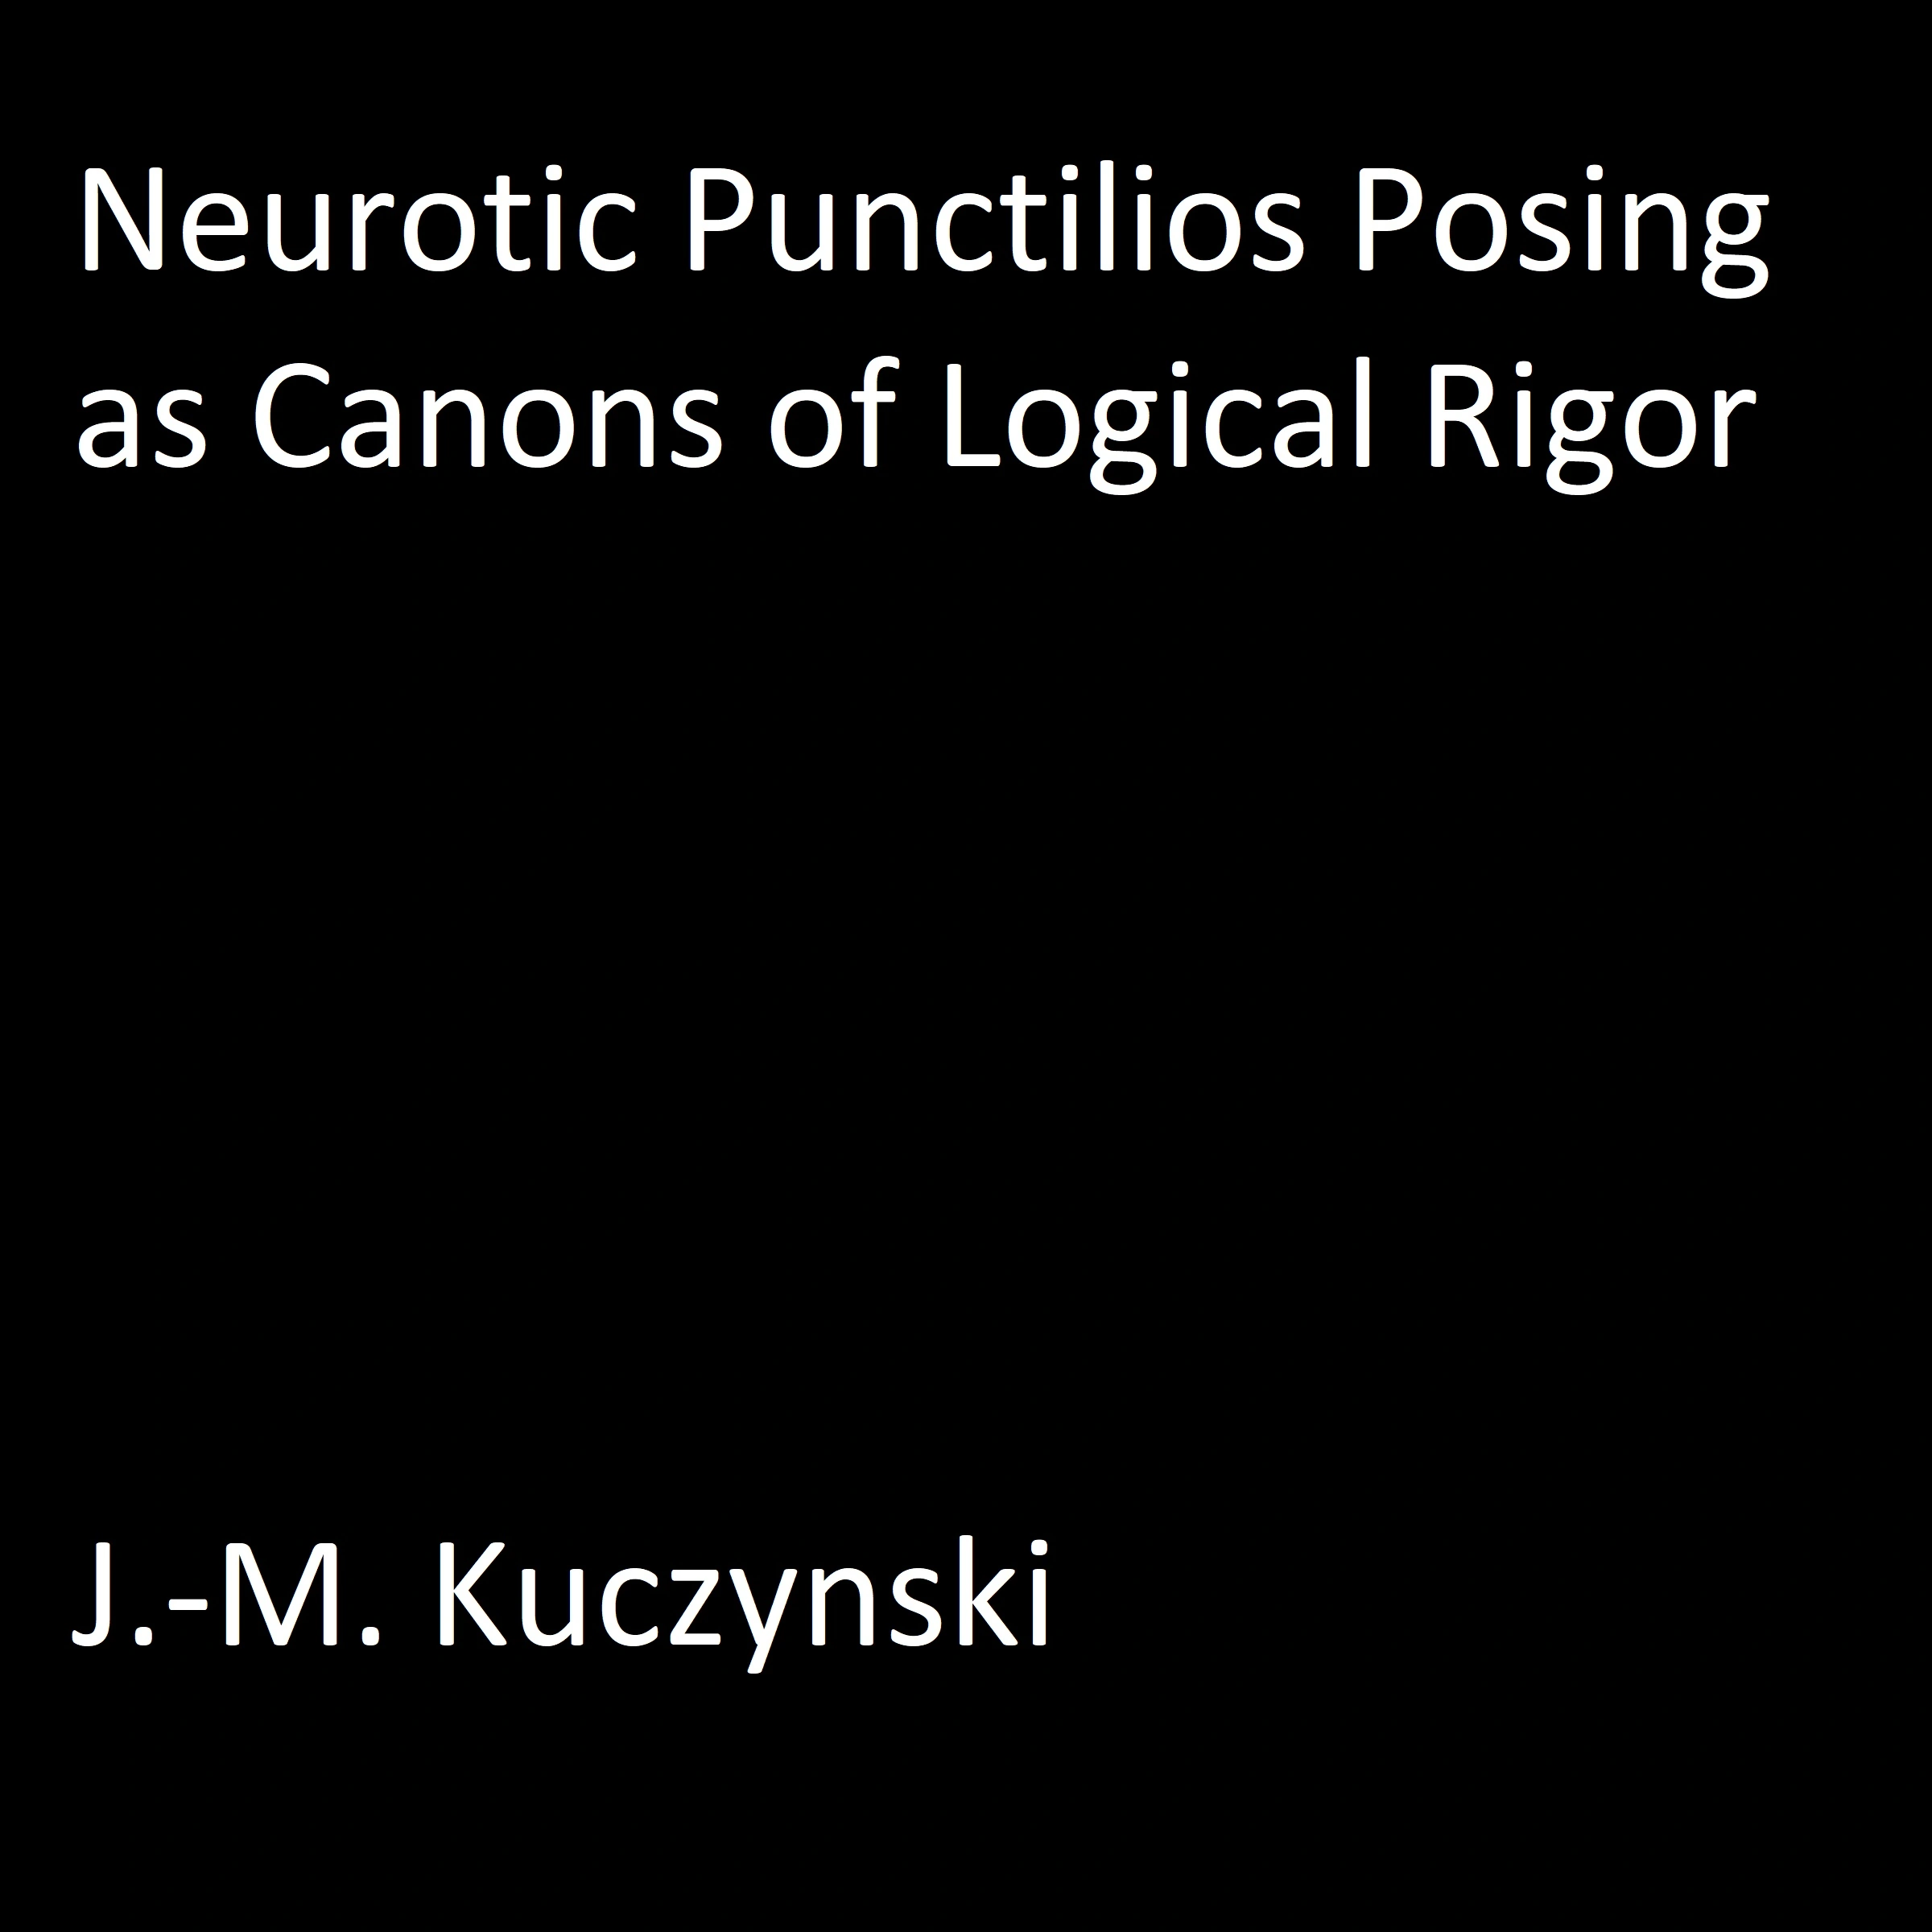 Neurotic Punctilios Posing as Canons of Logical Rigor Audiobook by J.-M. Kuczynski